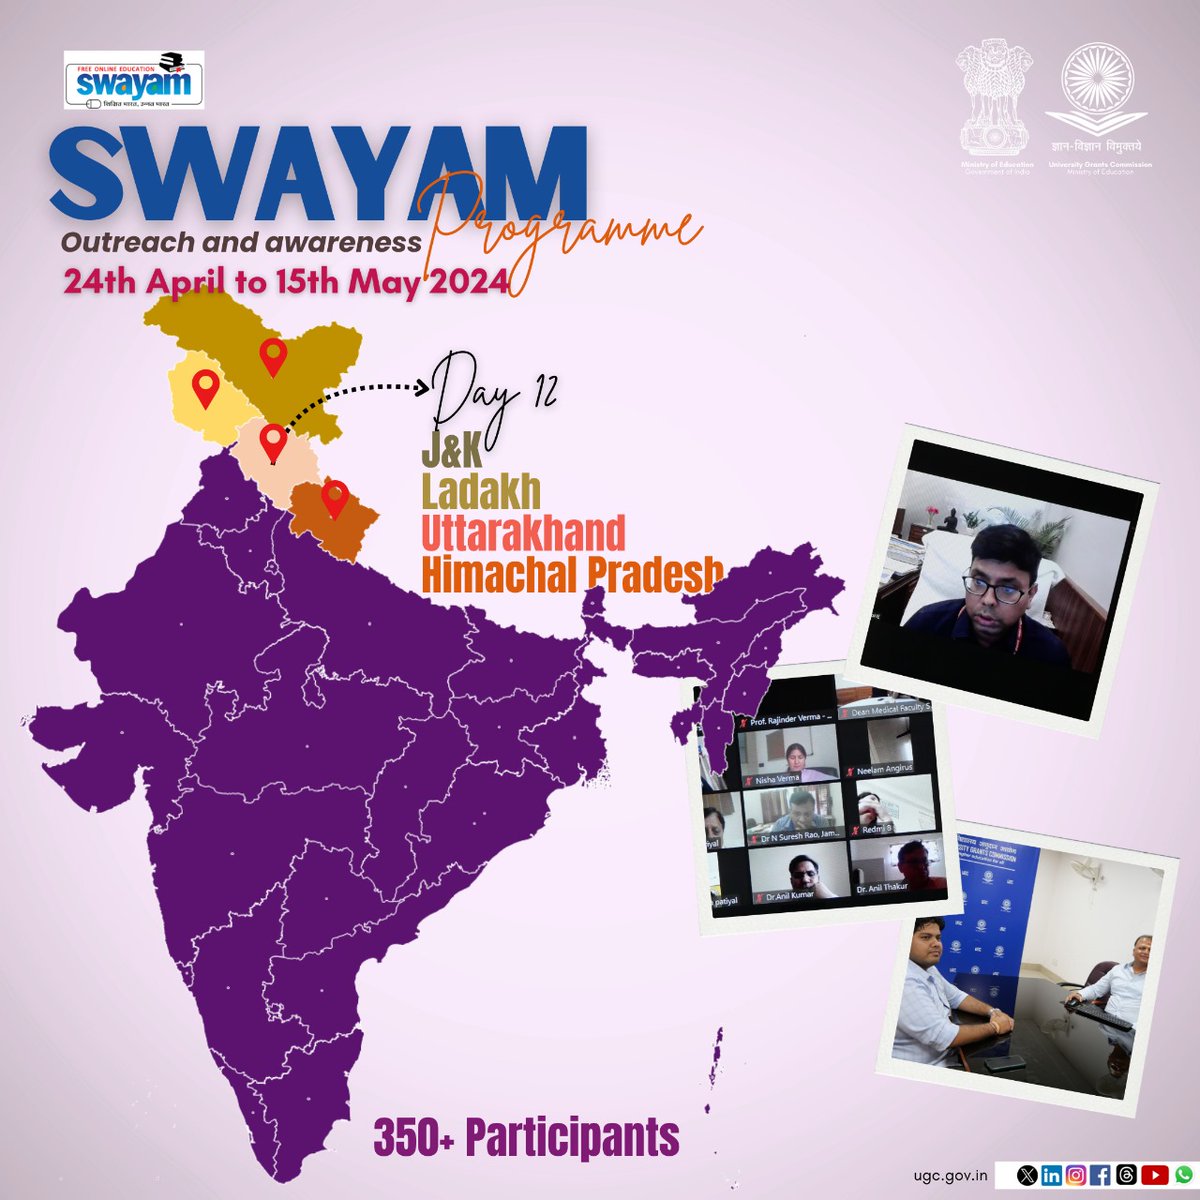 UGC Updates: SWAYAM Outreach & Awareness Programme, Day 12 Sh. @GovindJaiswal8, JS(TEL), Ministry of Education, & UGC Officials interacting with VCs, Principals, SWAYAM Local Chapters & NEP SAARTHIs, exchanging ideas, best practices, & insights related to SWAYAM initiatives.